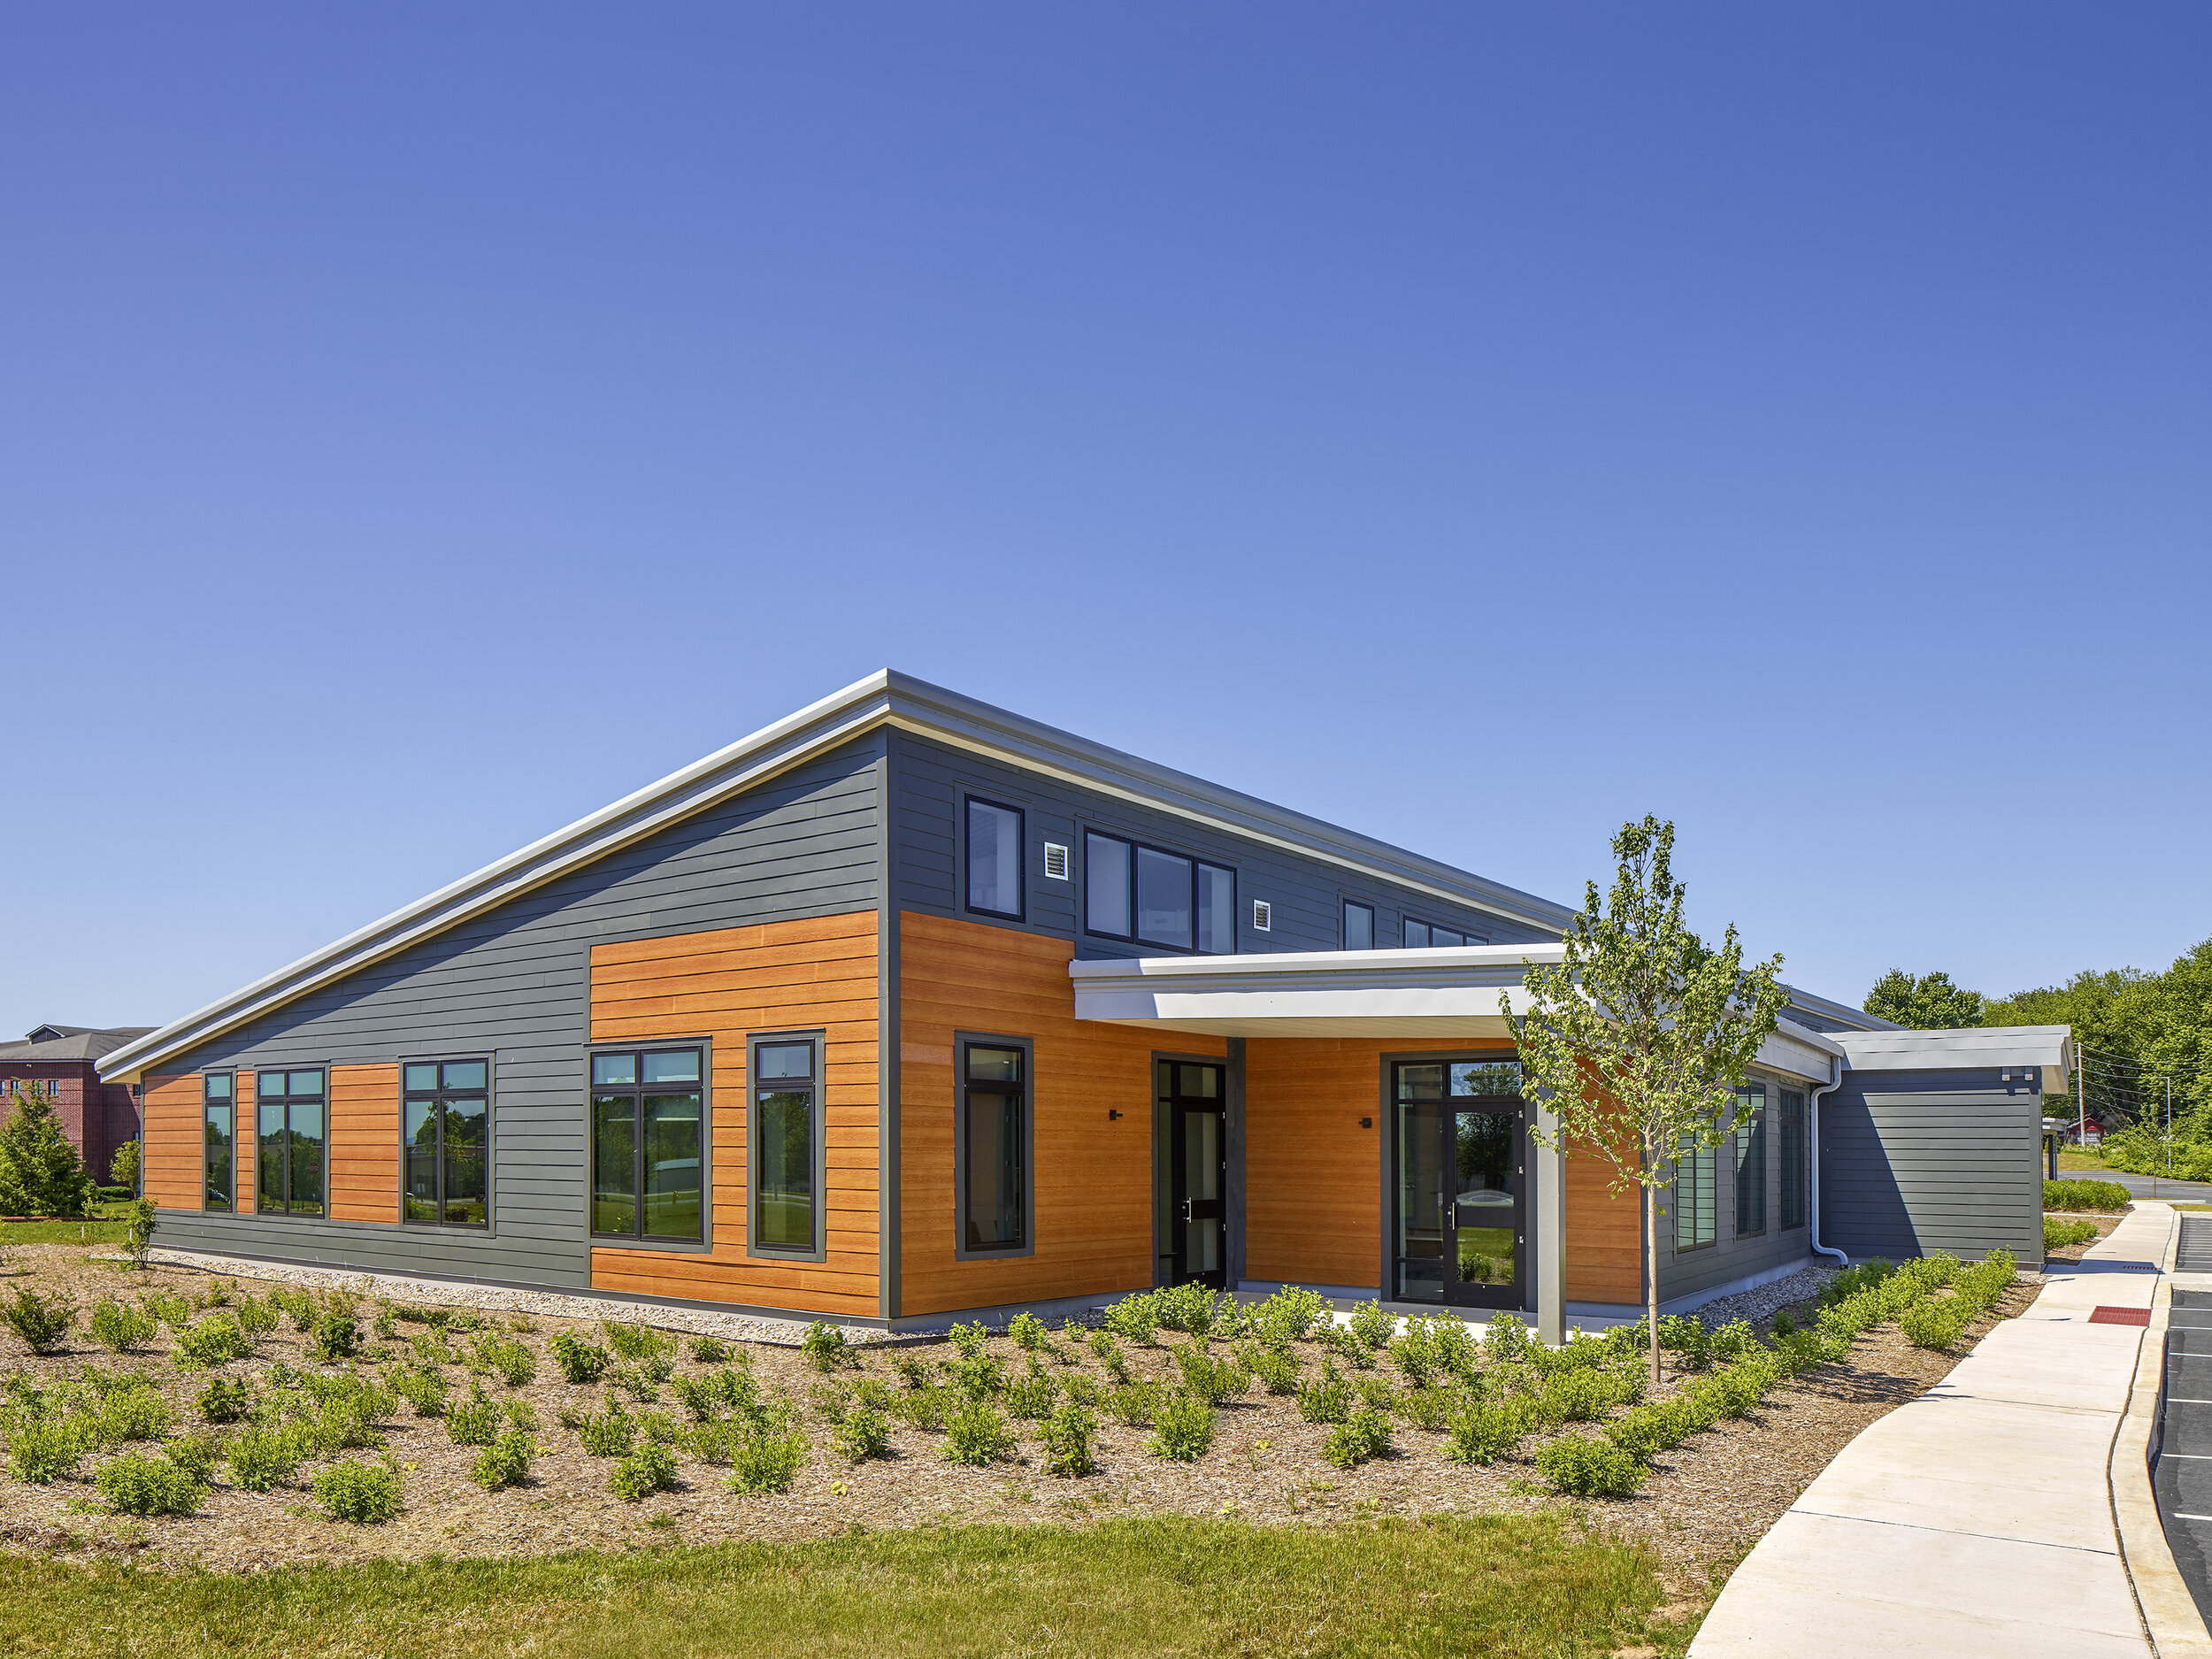 SEF ZERO ENERGY OFFICE BUILDING&lt;strong&gt;Drawing on Passive House strategies, the design sets a regional standard in sustainability—from both economic and performance perspectives.&lt;/strong&gt;